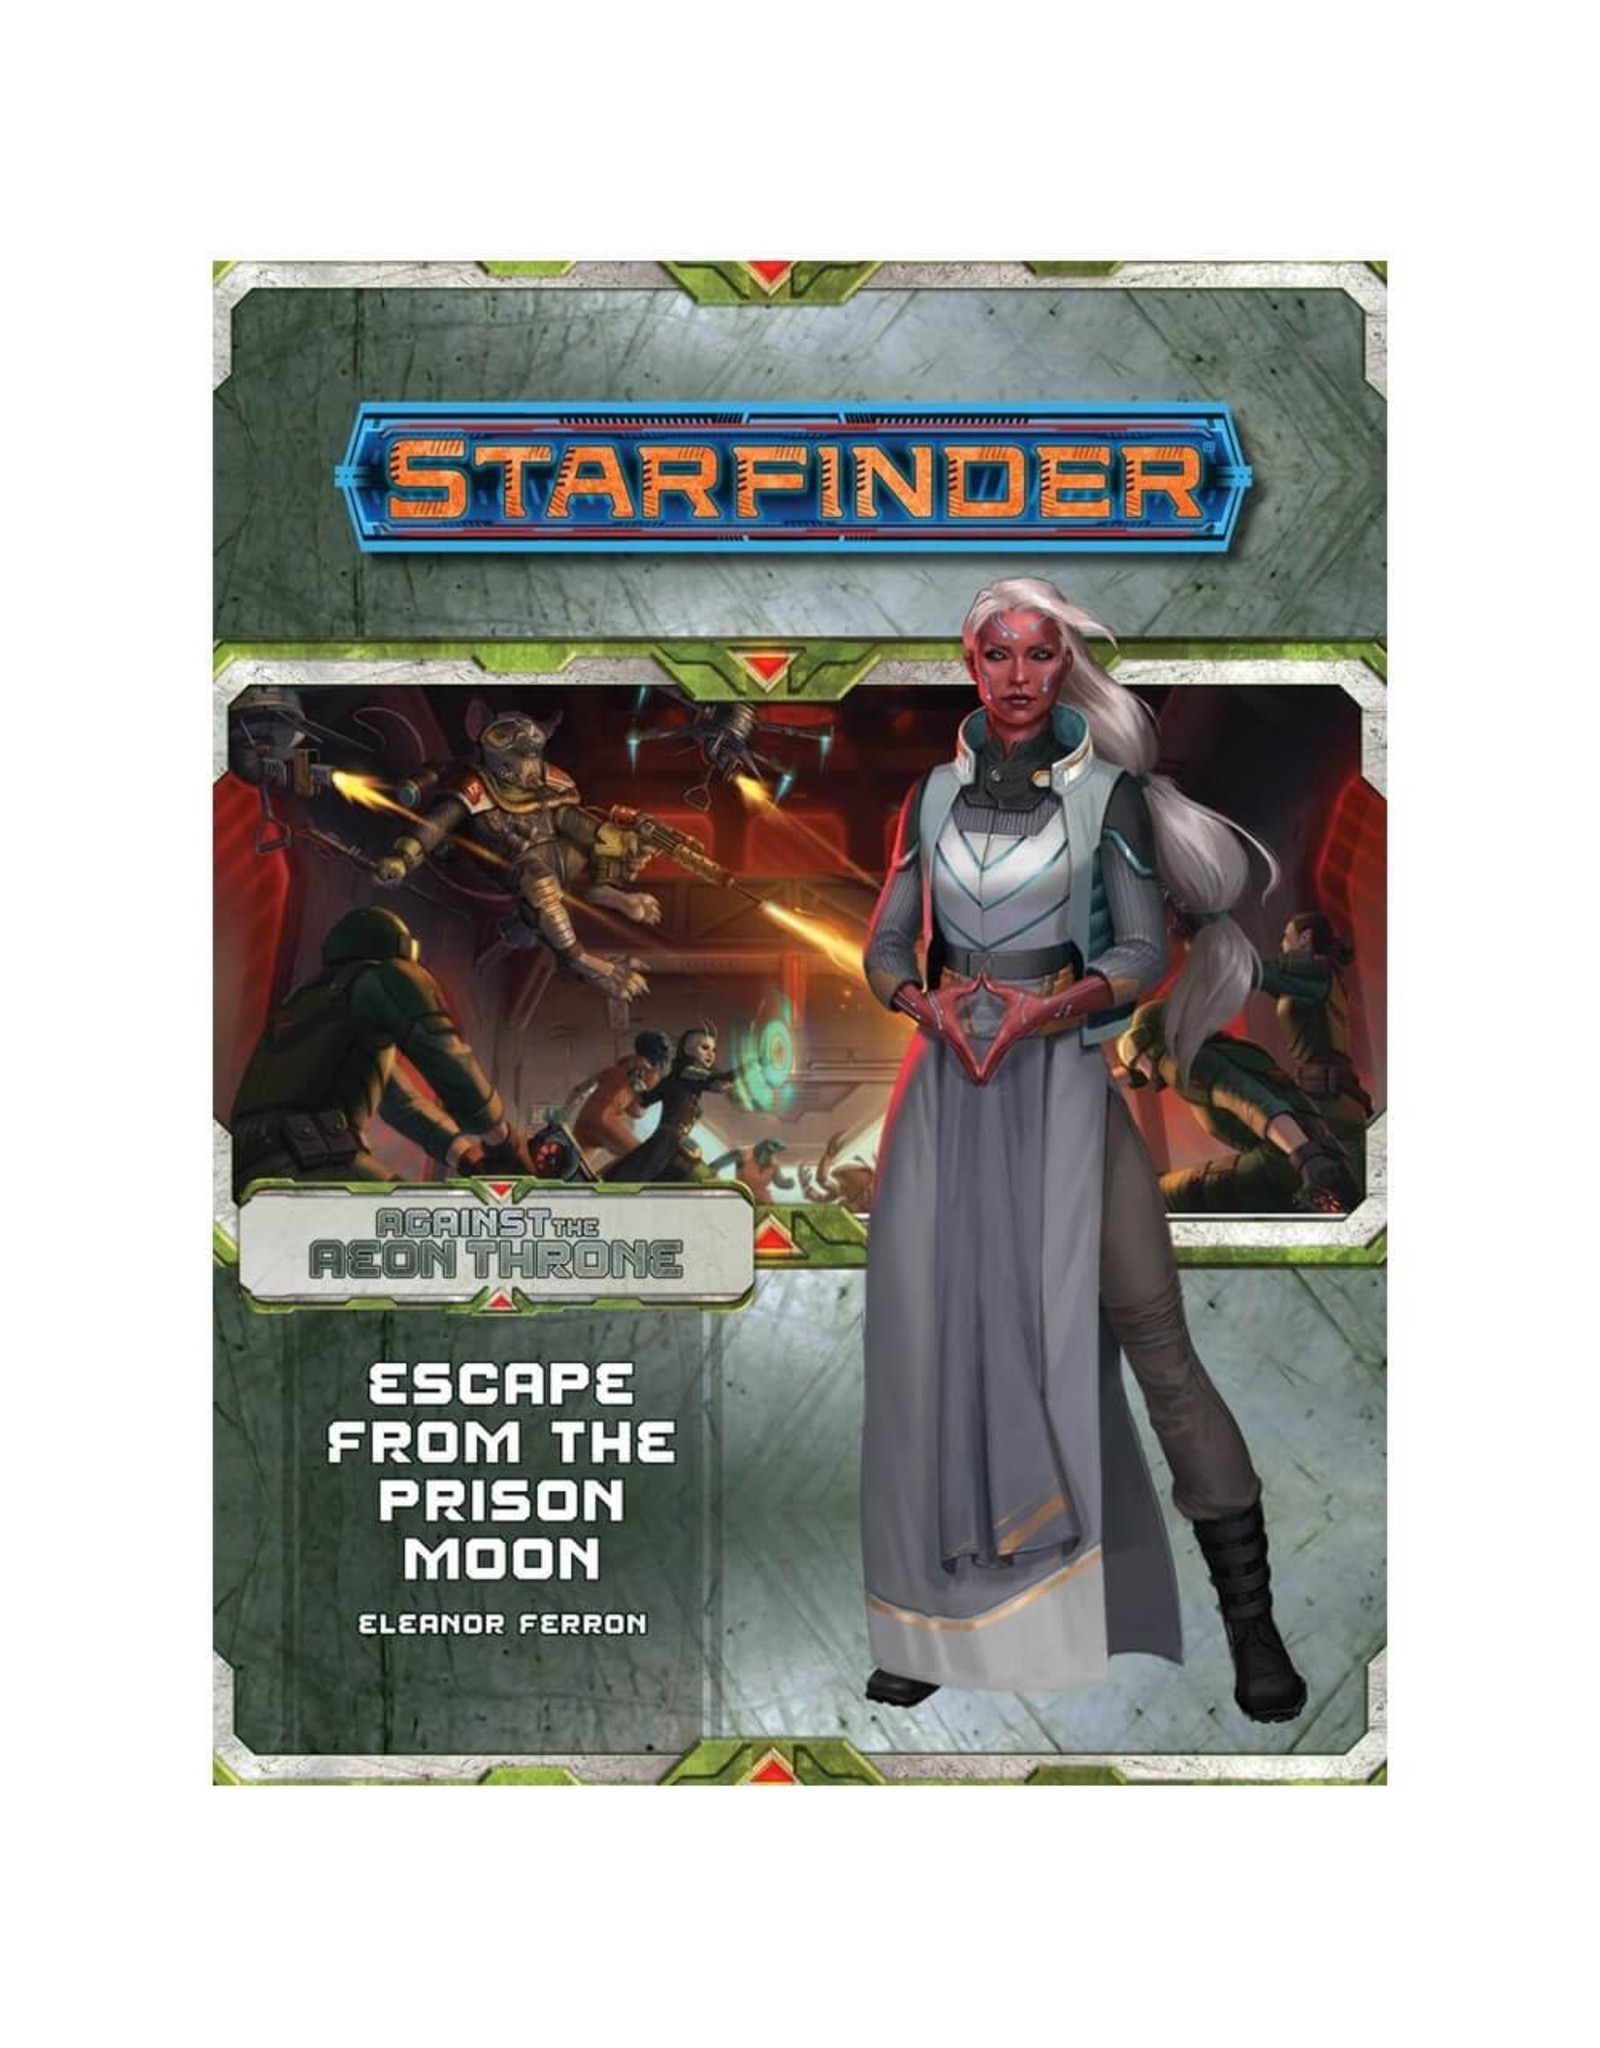 Starfinder RPG: Adventure Path - Against the Aeon Throne 2 - Escape from the Prison Moon